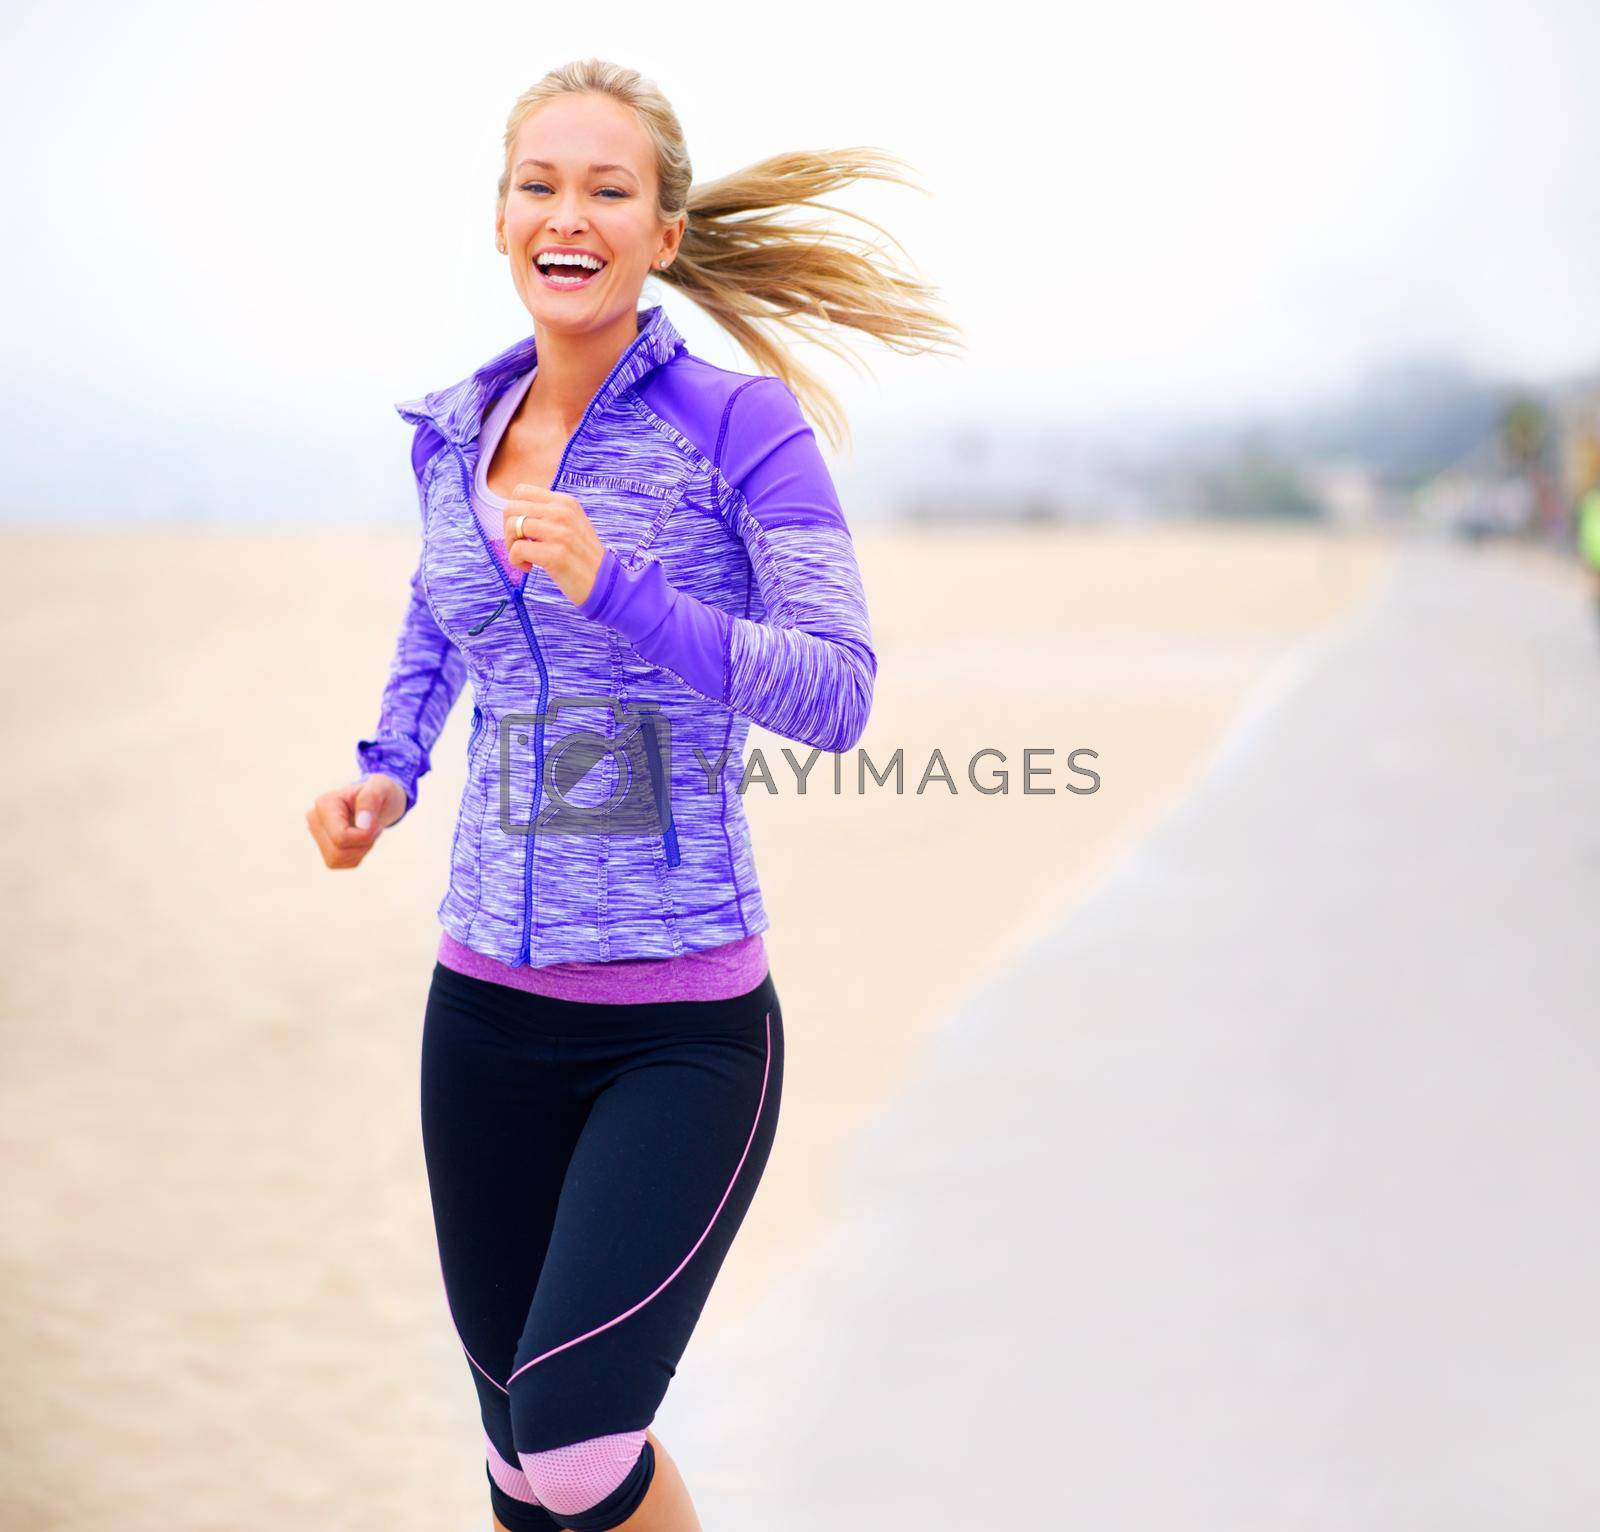 Royalty free image of Im pumped for this run. Portrait of a young woman jogging near the beach. by YuriArcurs